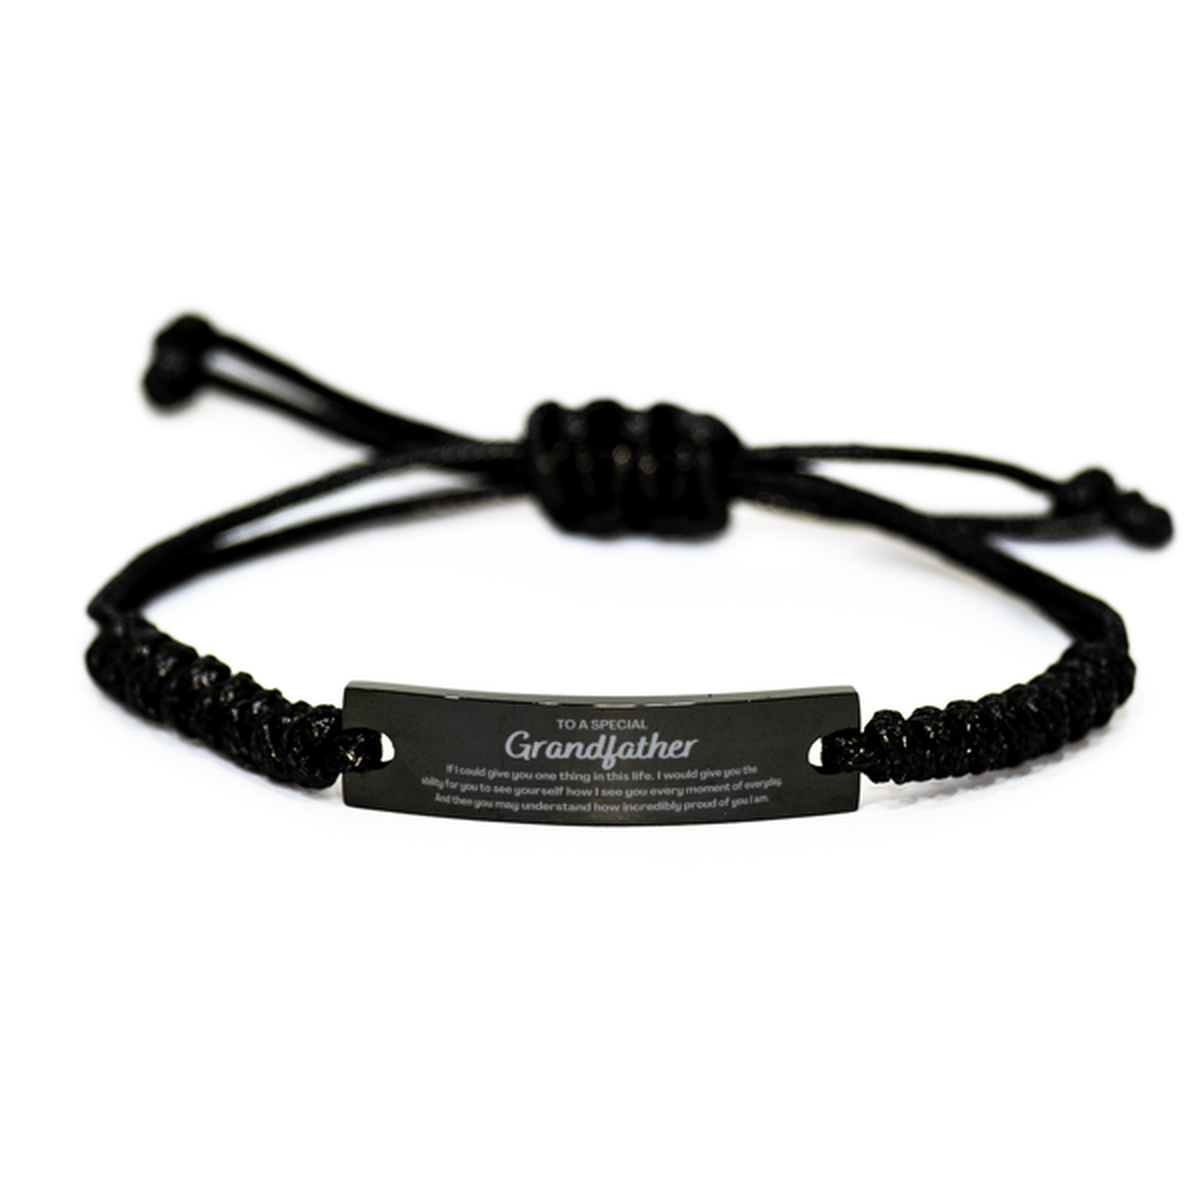 To My Grandfather Black Rope Bracelet, Gifts For Grandfather Engraved, Inspirational Gifts for Christmas Birthday, Epic Gifts for Grandfather To A Special Grandfather how incredibly proud of you I am